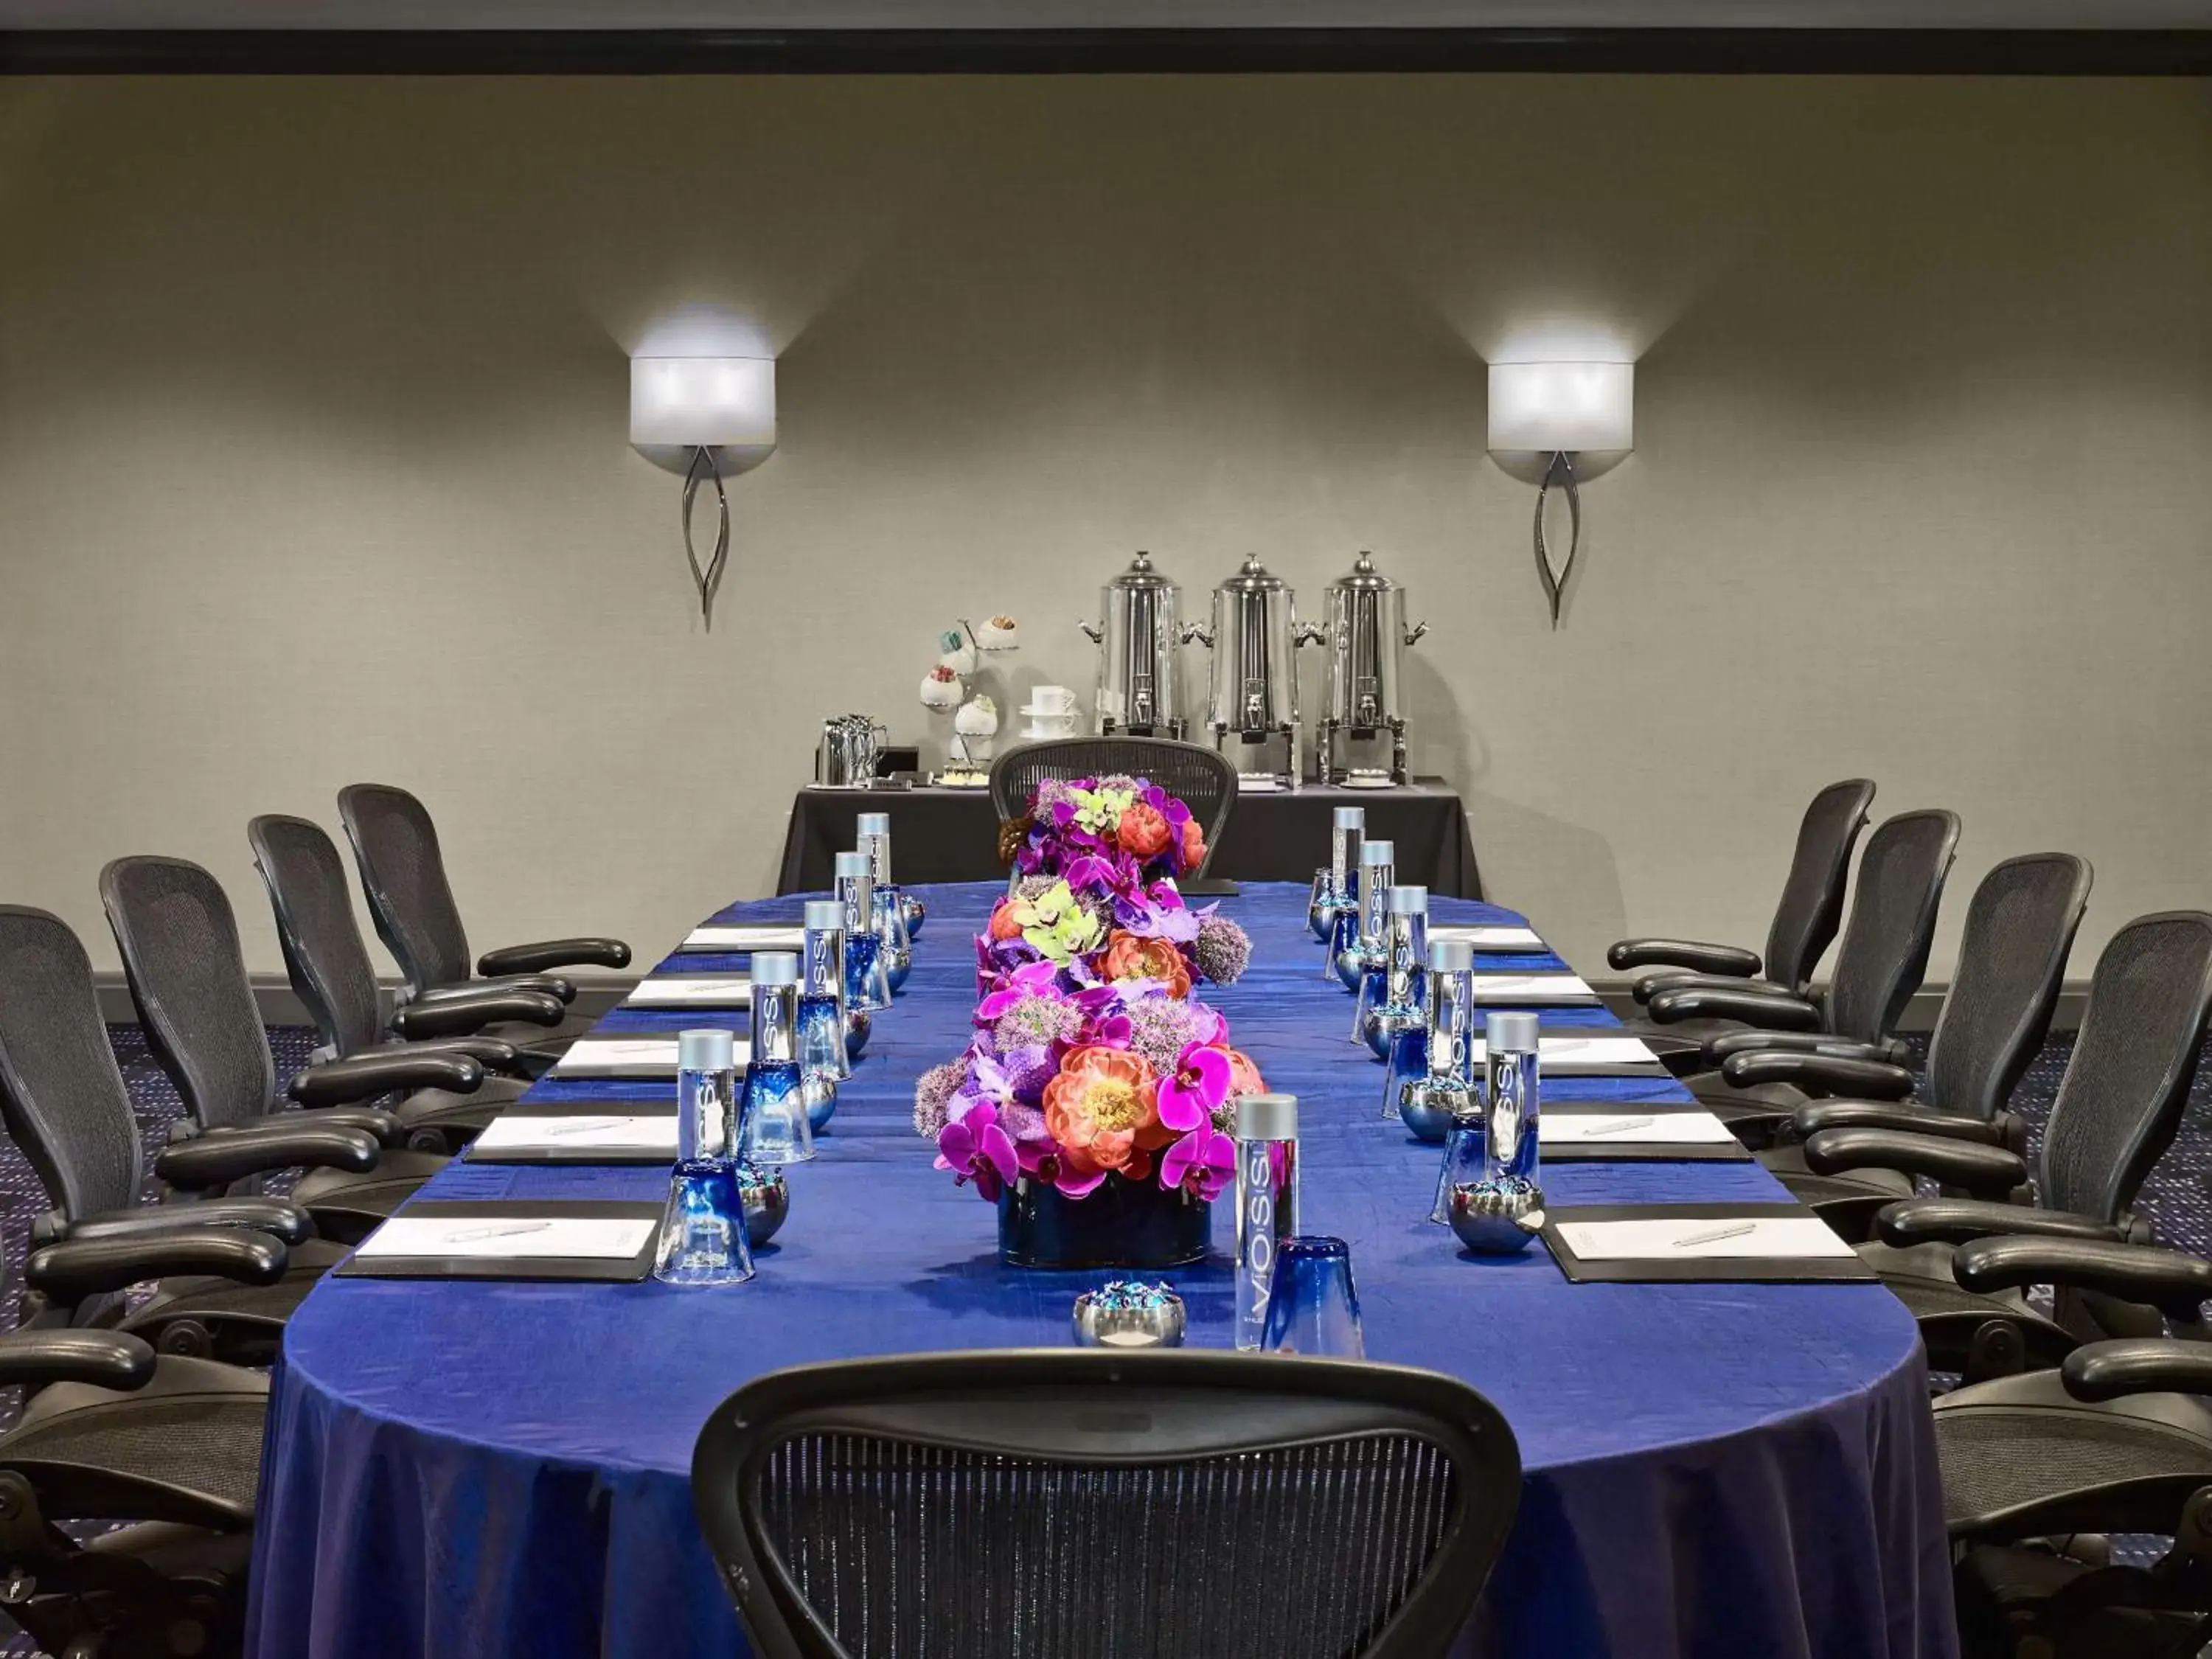 Meeting/conference room in The Royal Sonesta Boston